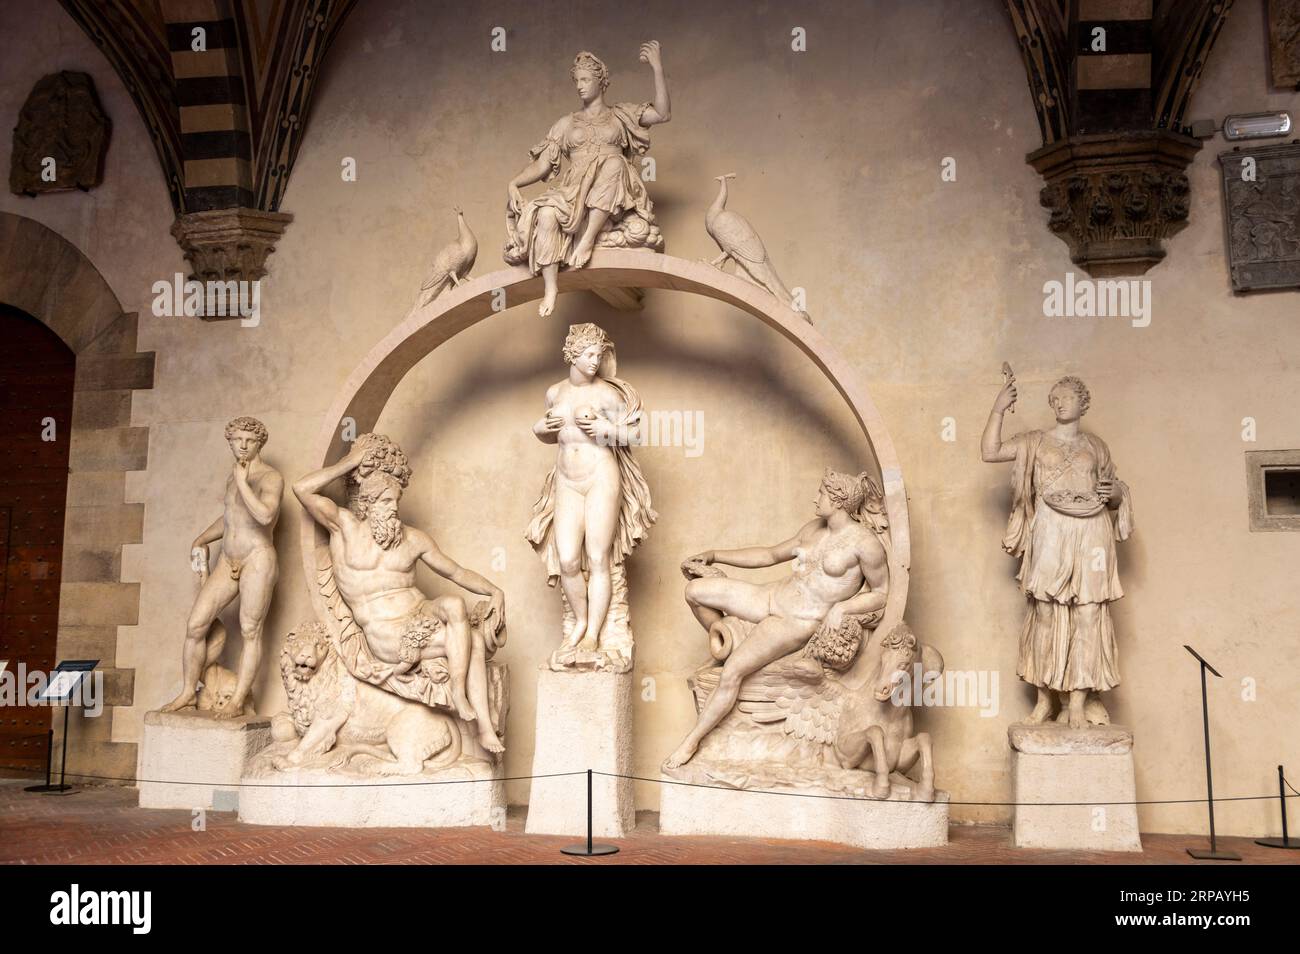 Under the arches of the courtyard is Fontana di Saa Grande (Fountain for the Sala Grande) at the Museo Nazionale del Bargello (Bargello National Museu Stock Photo